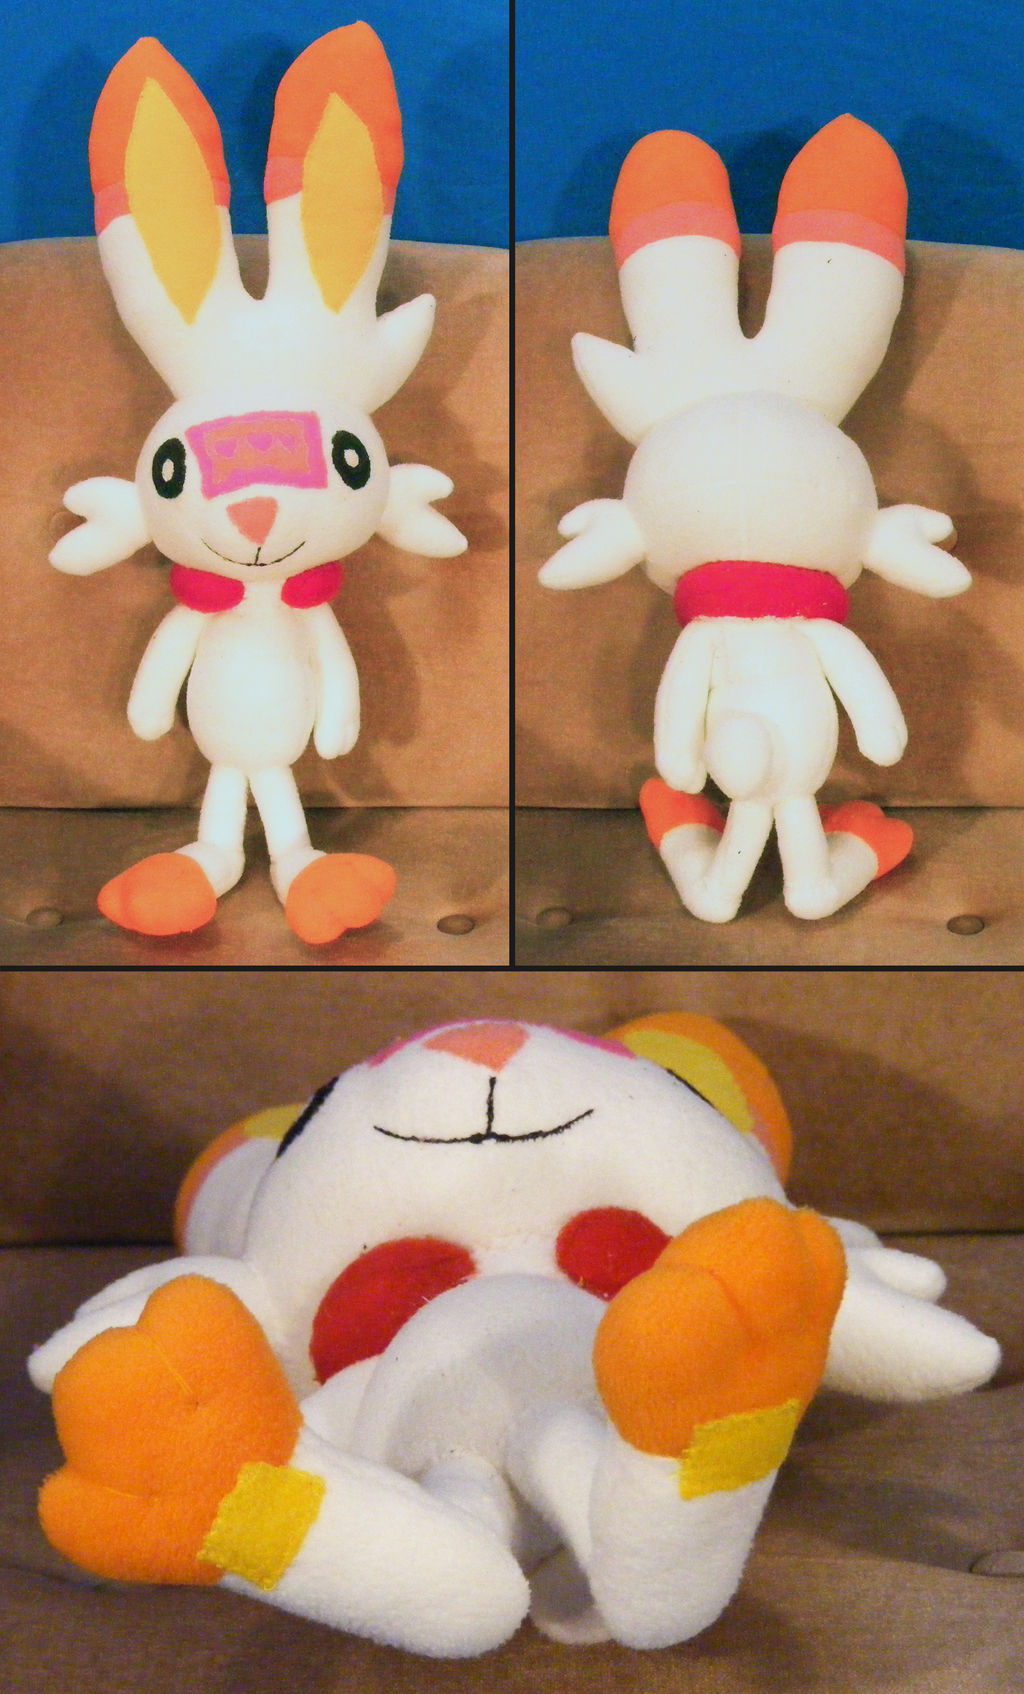 Tracey Scouter the Scorbunny Plush (Keeping)